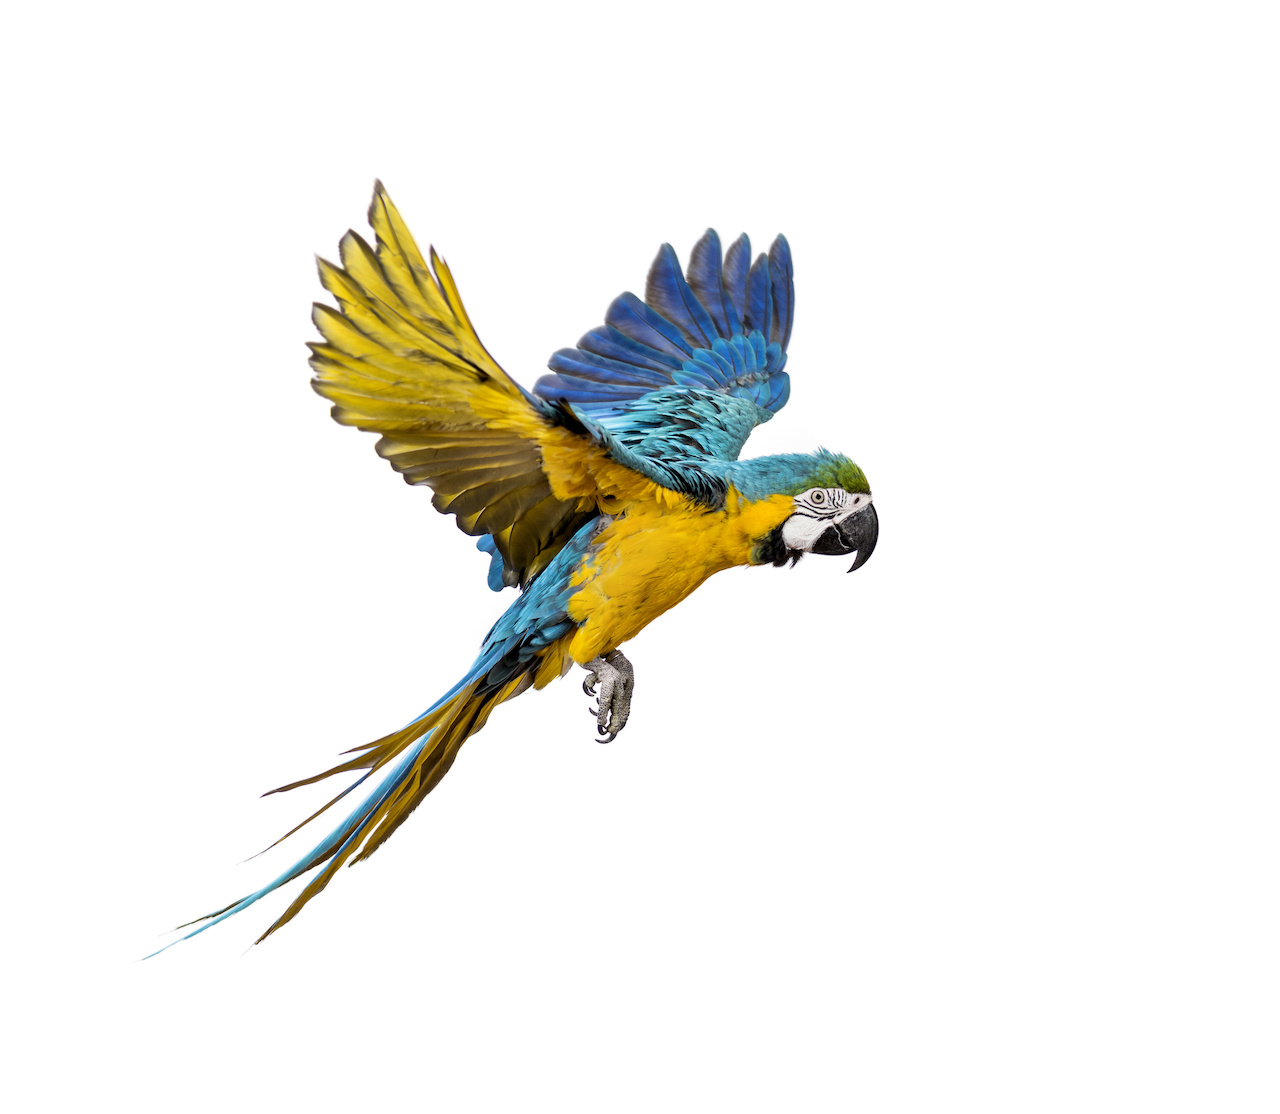 Side view of a blue-and-yellow macaw, Ara ararauna, flying, isolated